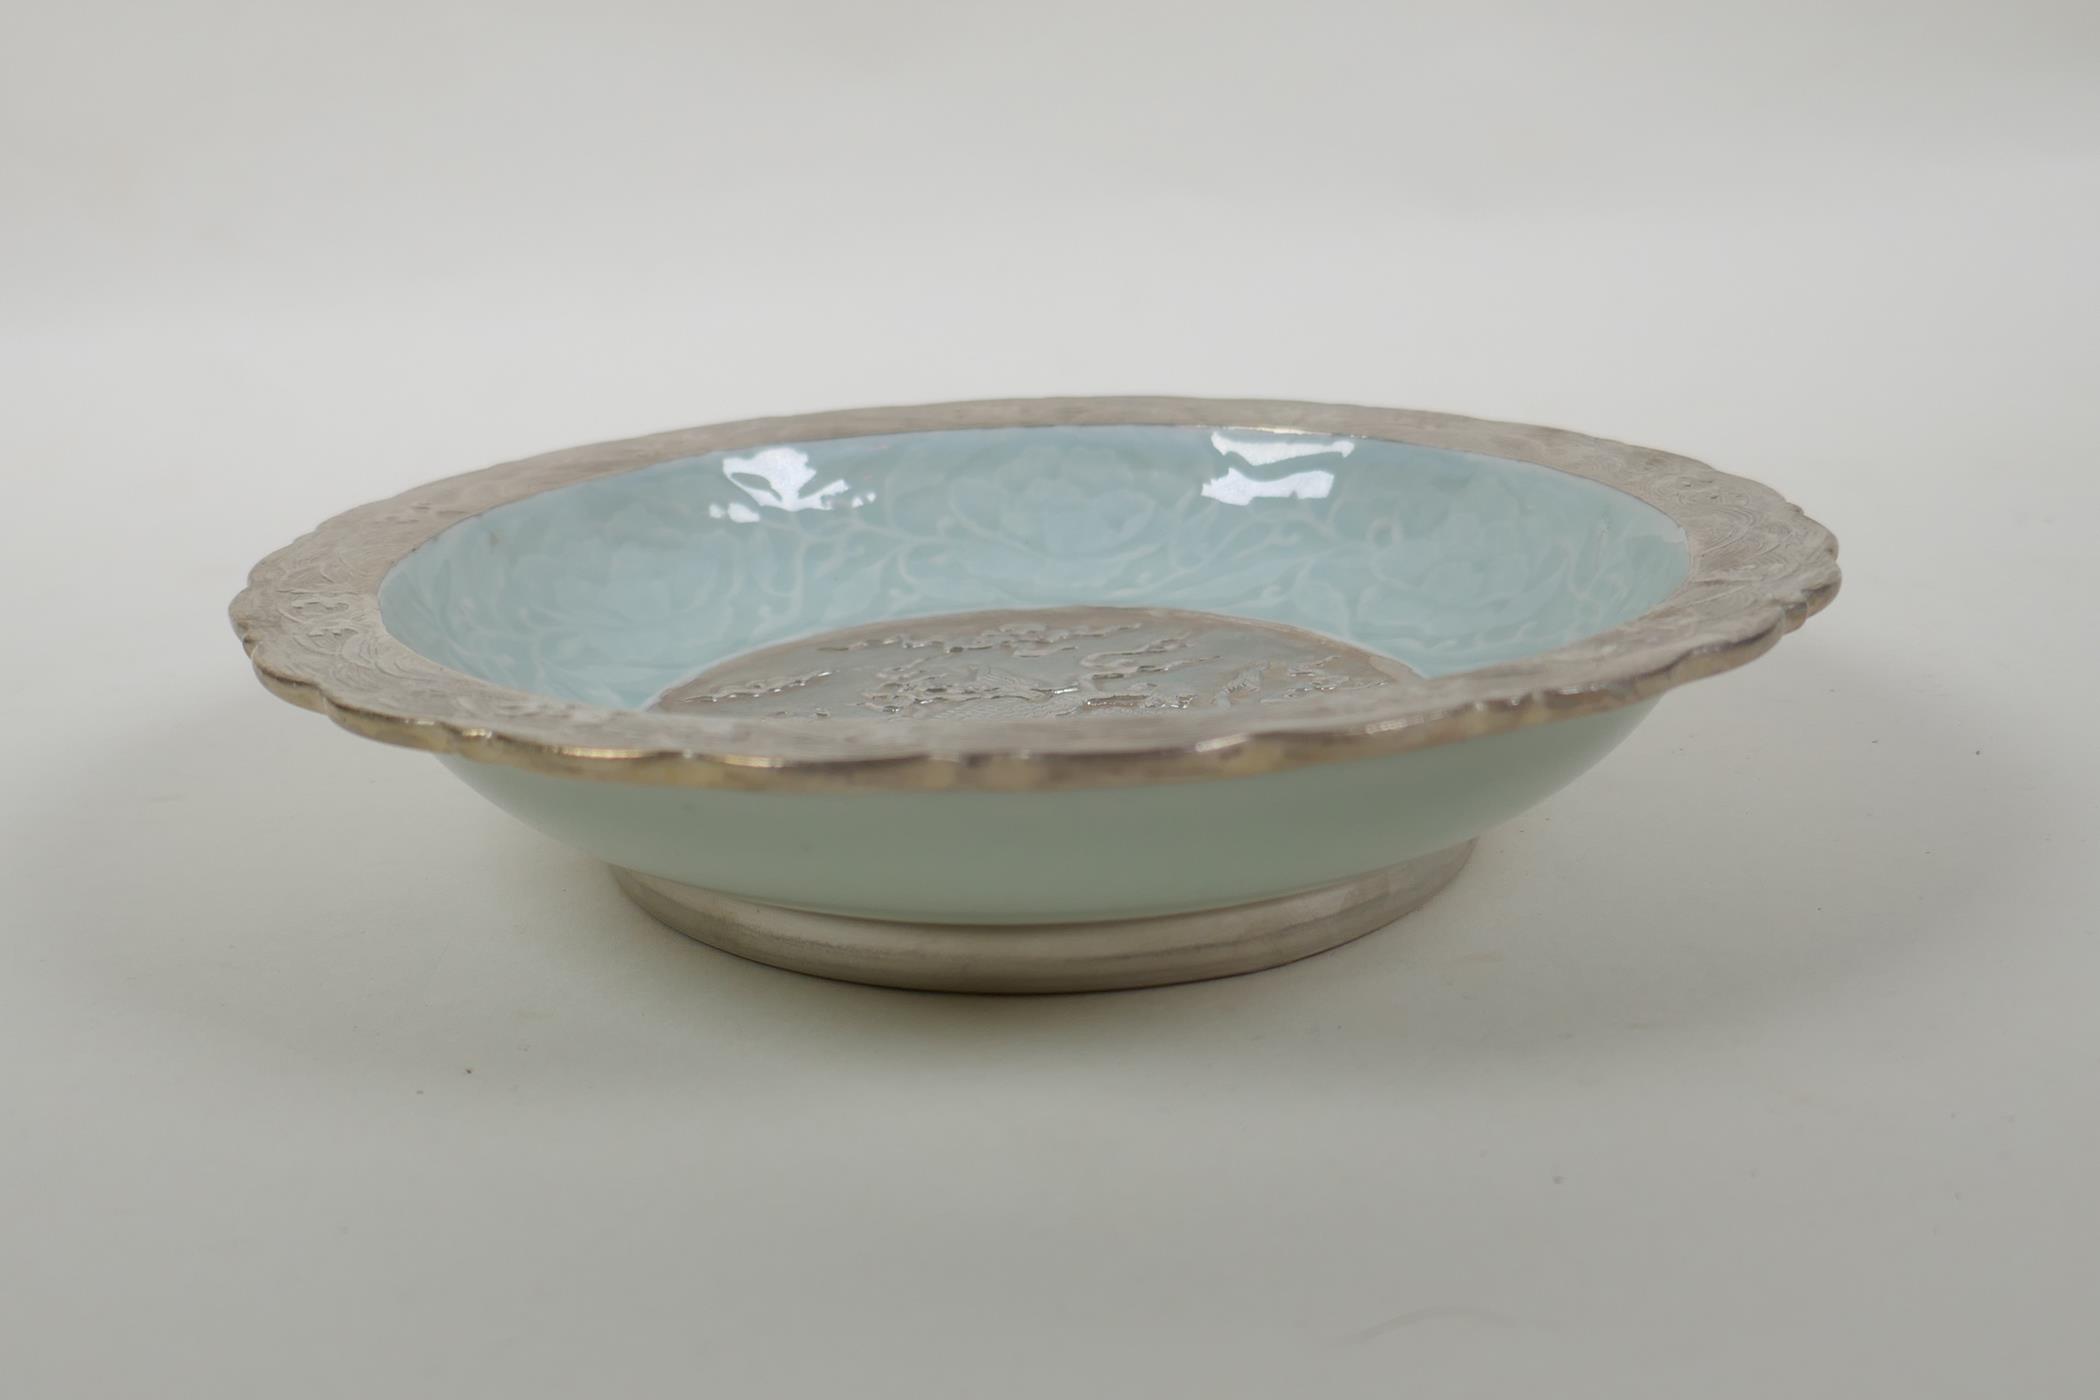 A Chinese celadon and silver glazed porcelain bowl with lobed rim, decorated with a dragon and lotus - Image 3 of 5